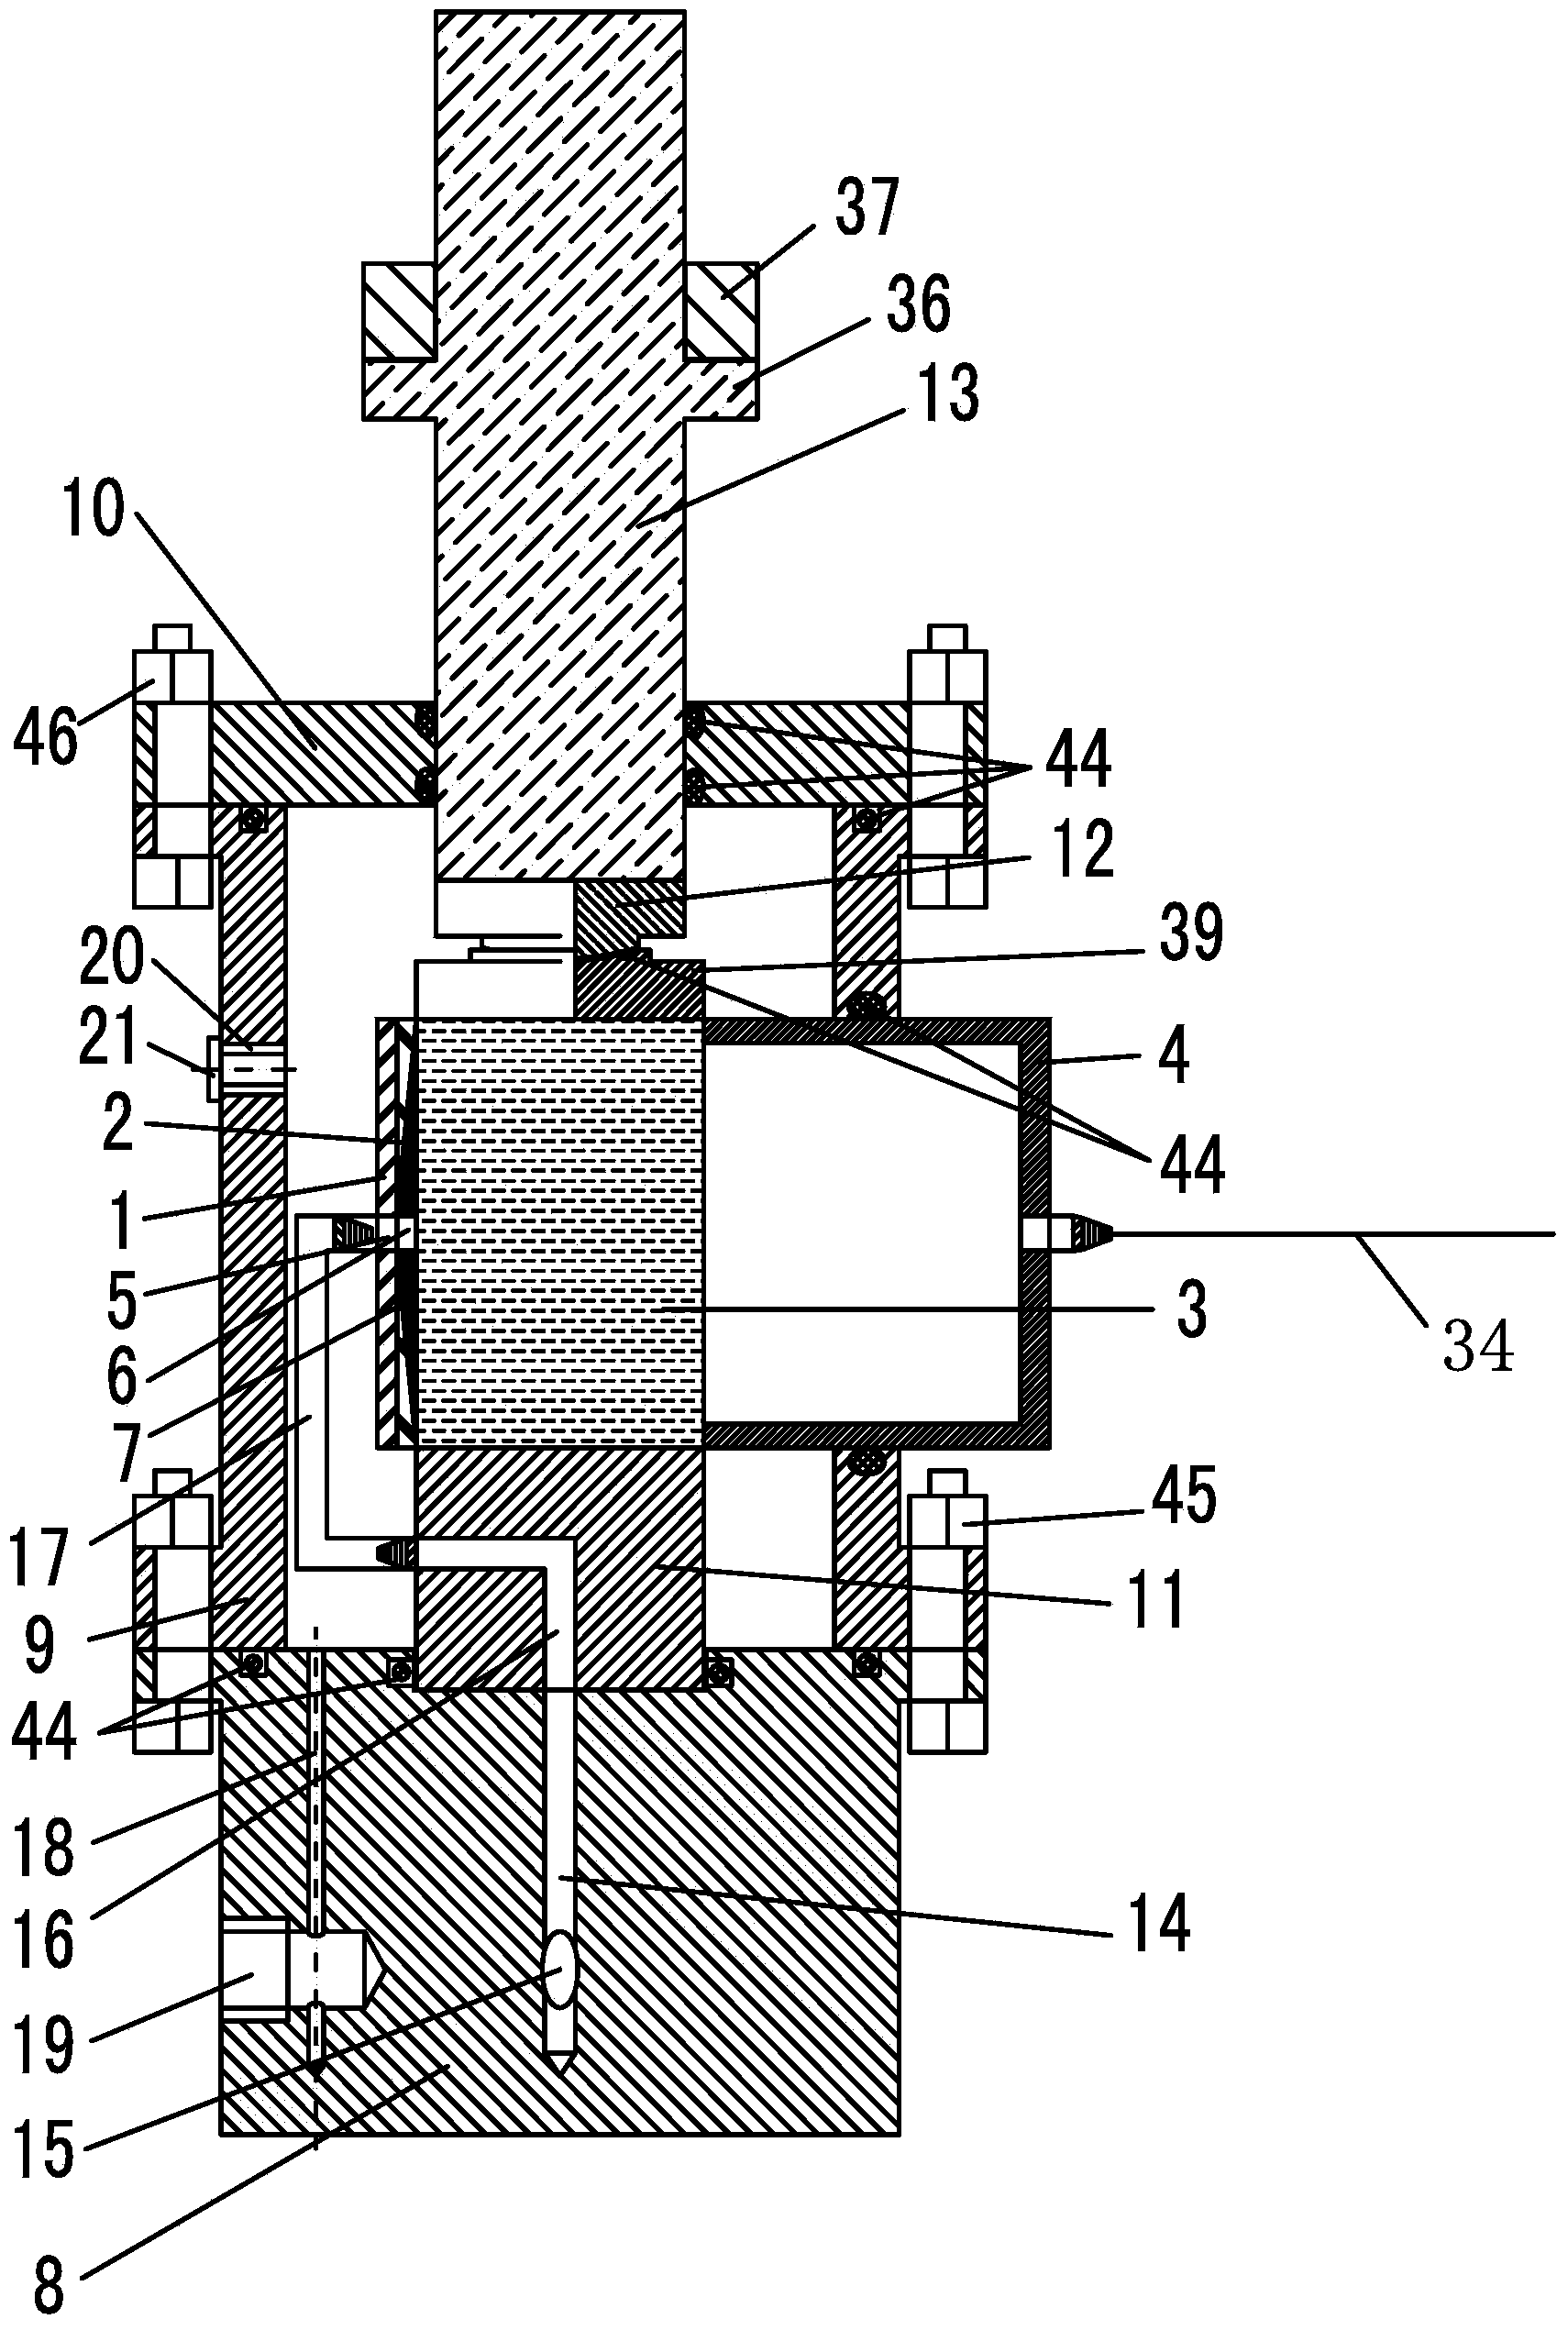 Coal body permeability characteristic testing system and method